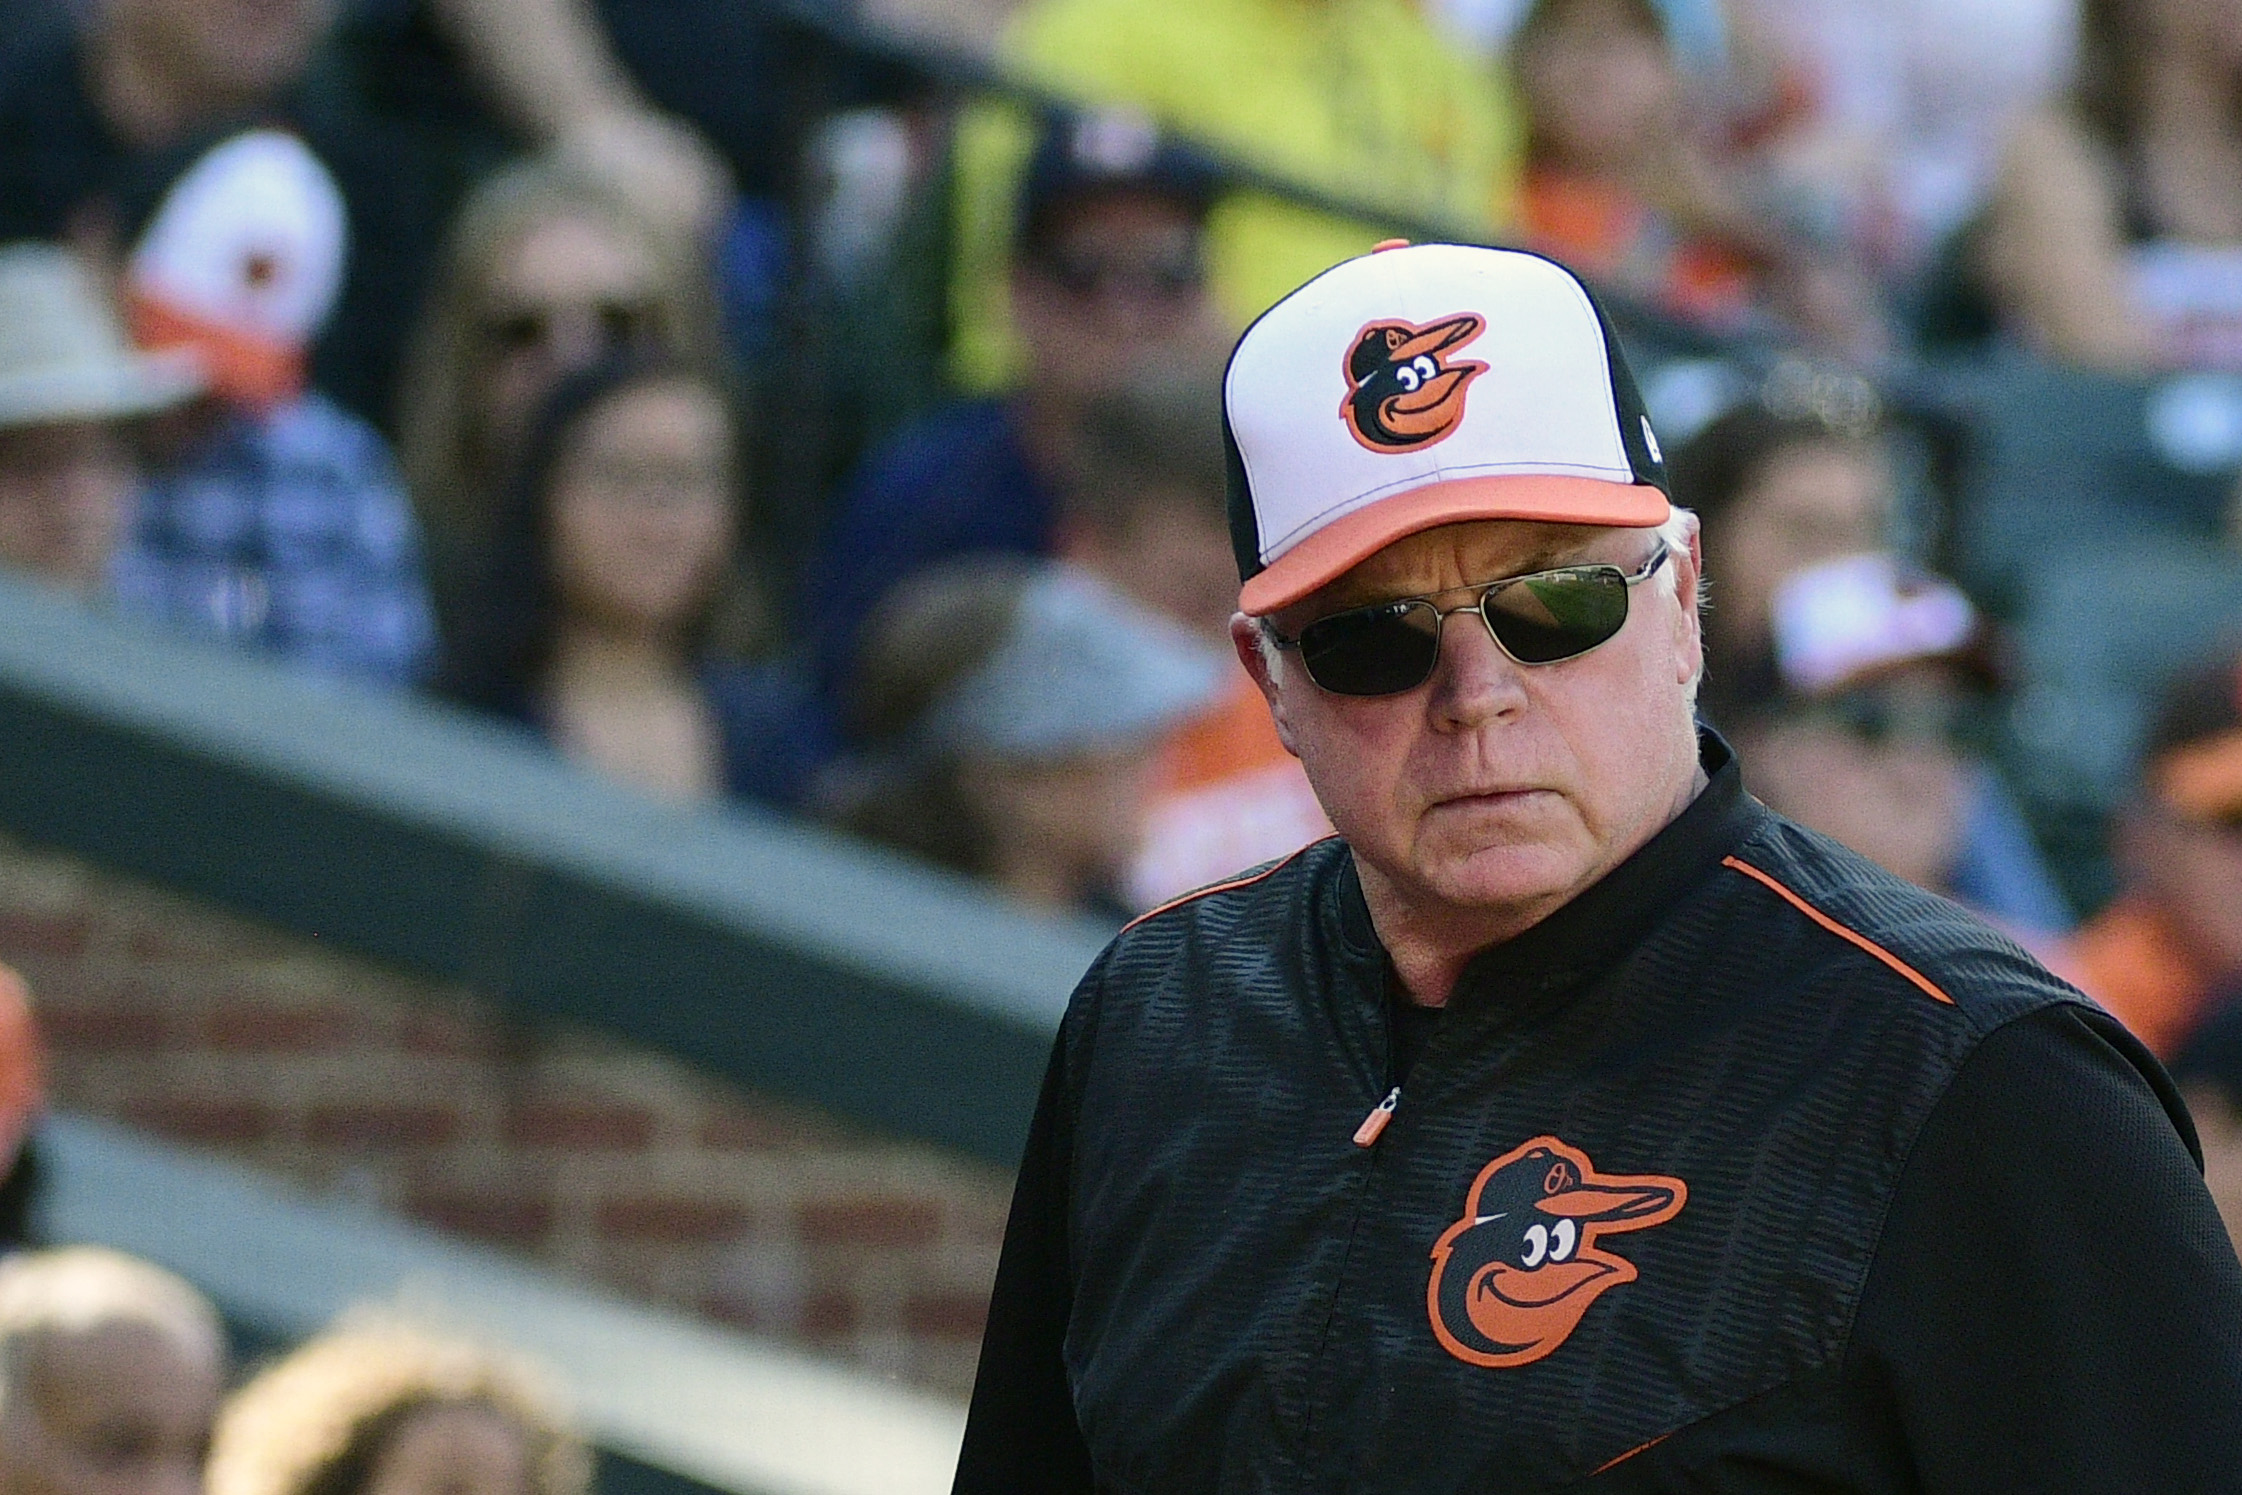 Manager Buck Showalter of the Baltimore Orioles poses for a